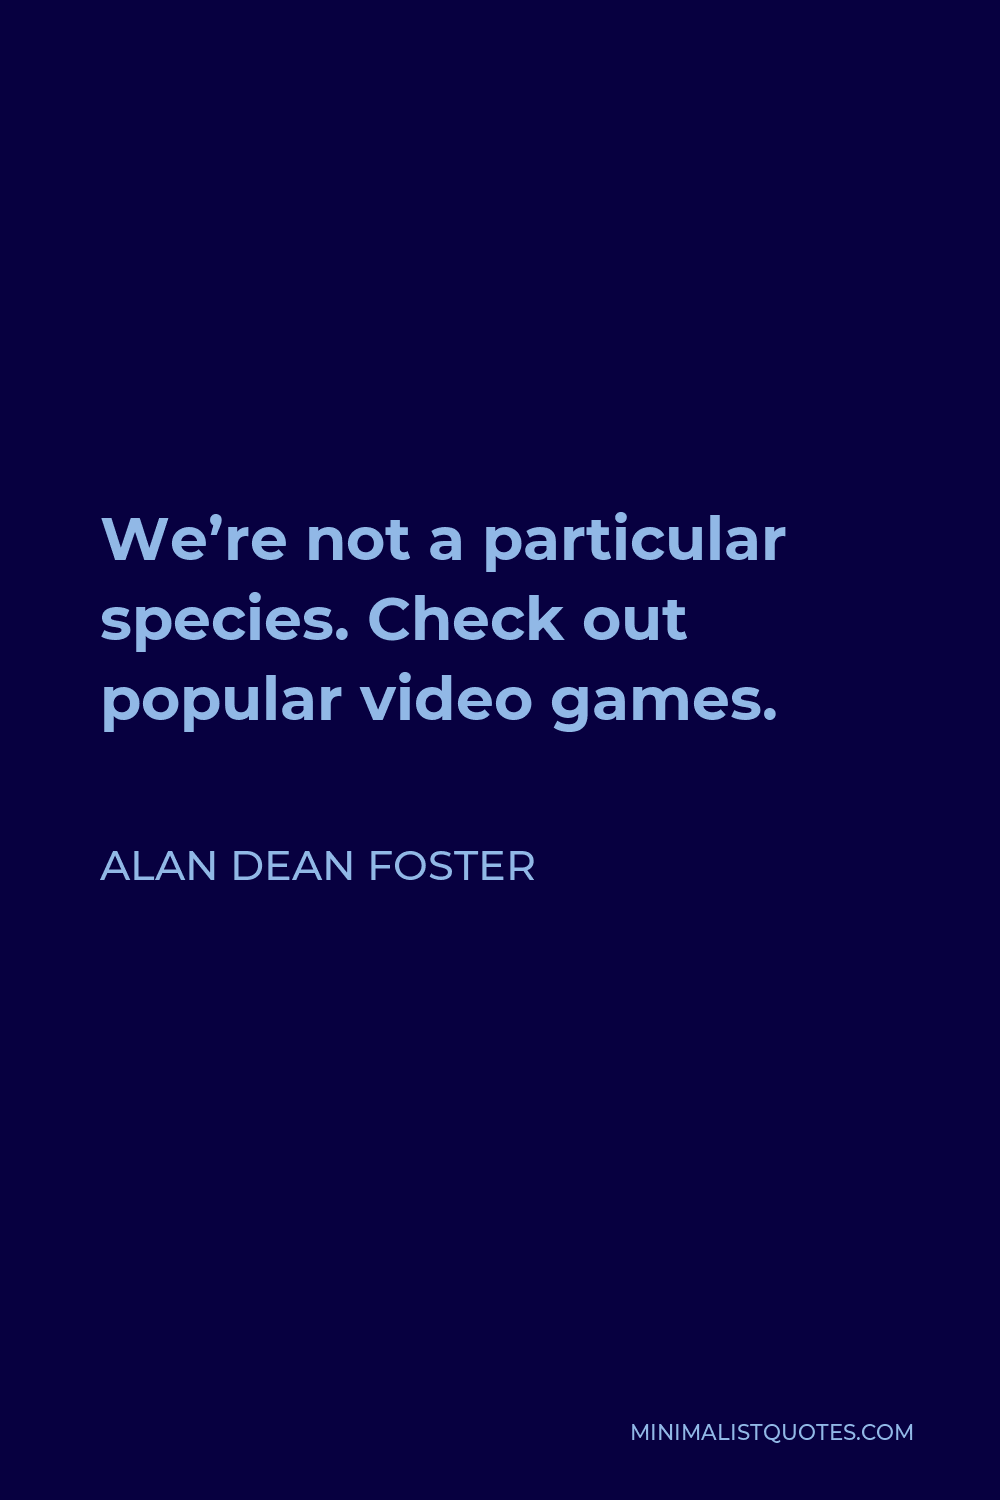 Alan Dean Foster Quote - We’re not a particular species. Check out popular video games.